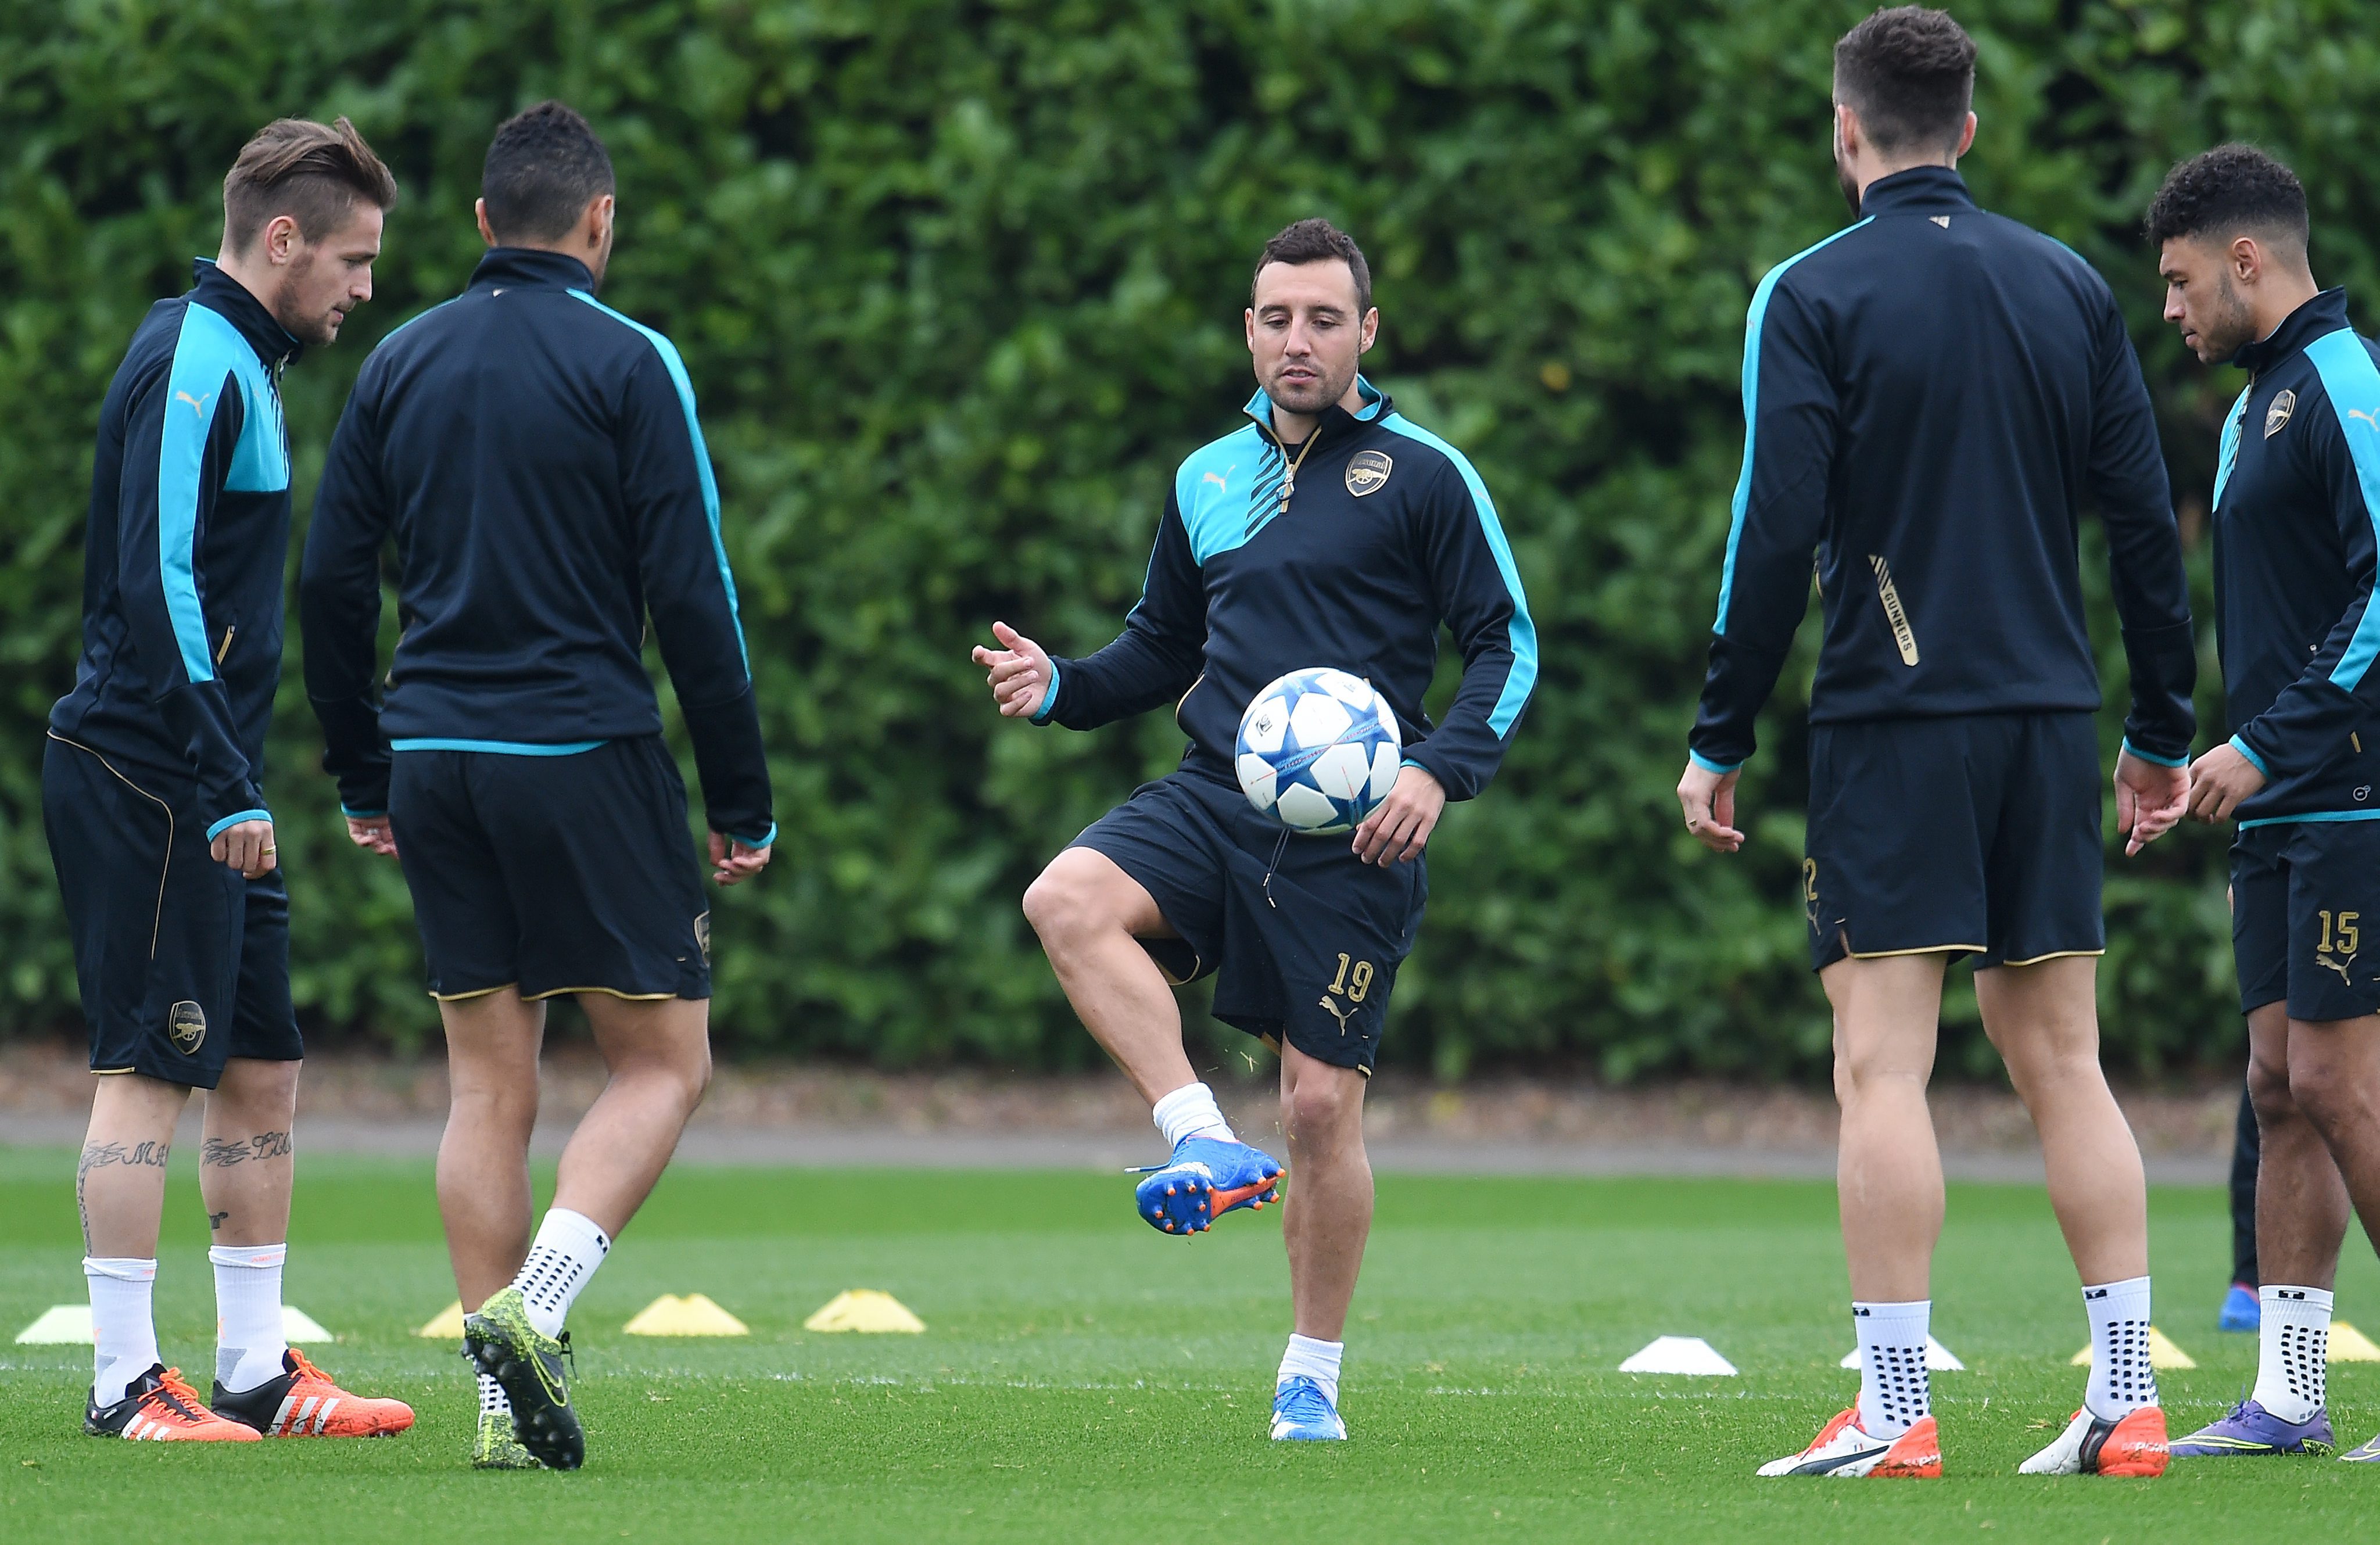 epa04983875 Arsenal's Santi Cazorla (C) during a training session with team mates at Arsenal's training complex at London Colney in Hertfordshire, north of London, Britain, 19 October 2015. Arsenal play Bayern Munich is an UEFA Champions League clash at the Emirates Stadium in London, 20 October.  EPA/ANDY RAIN